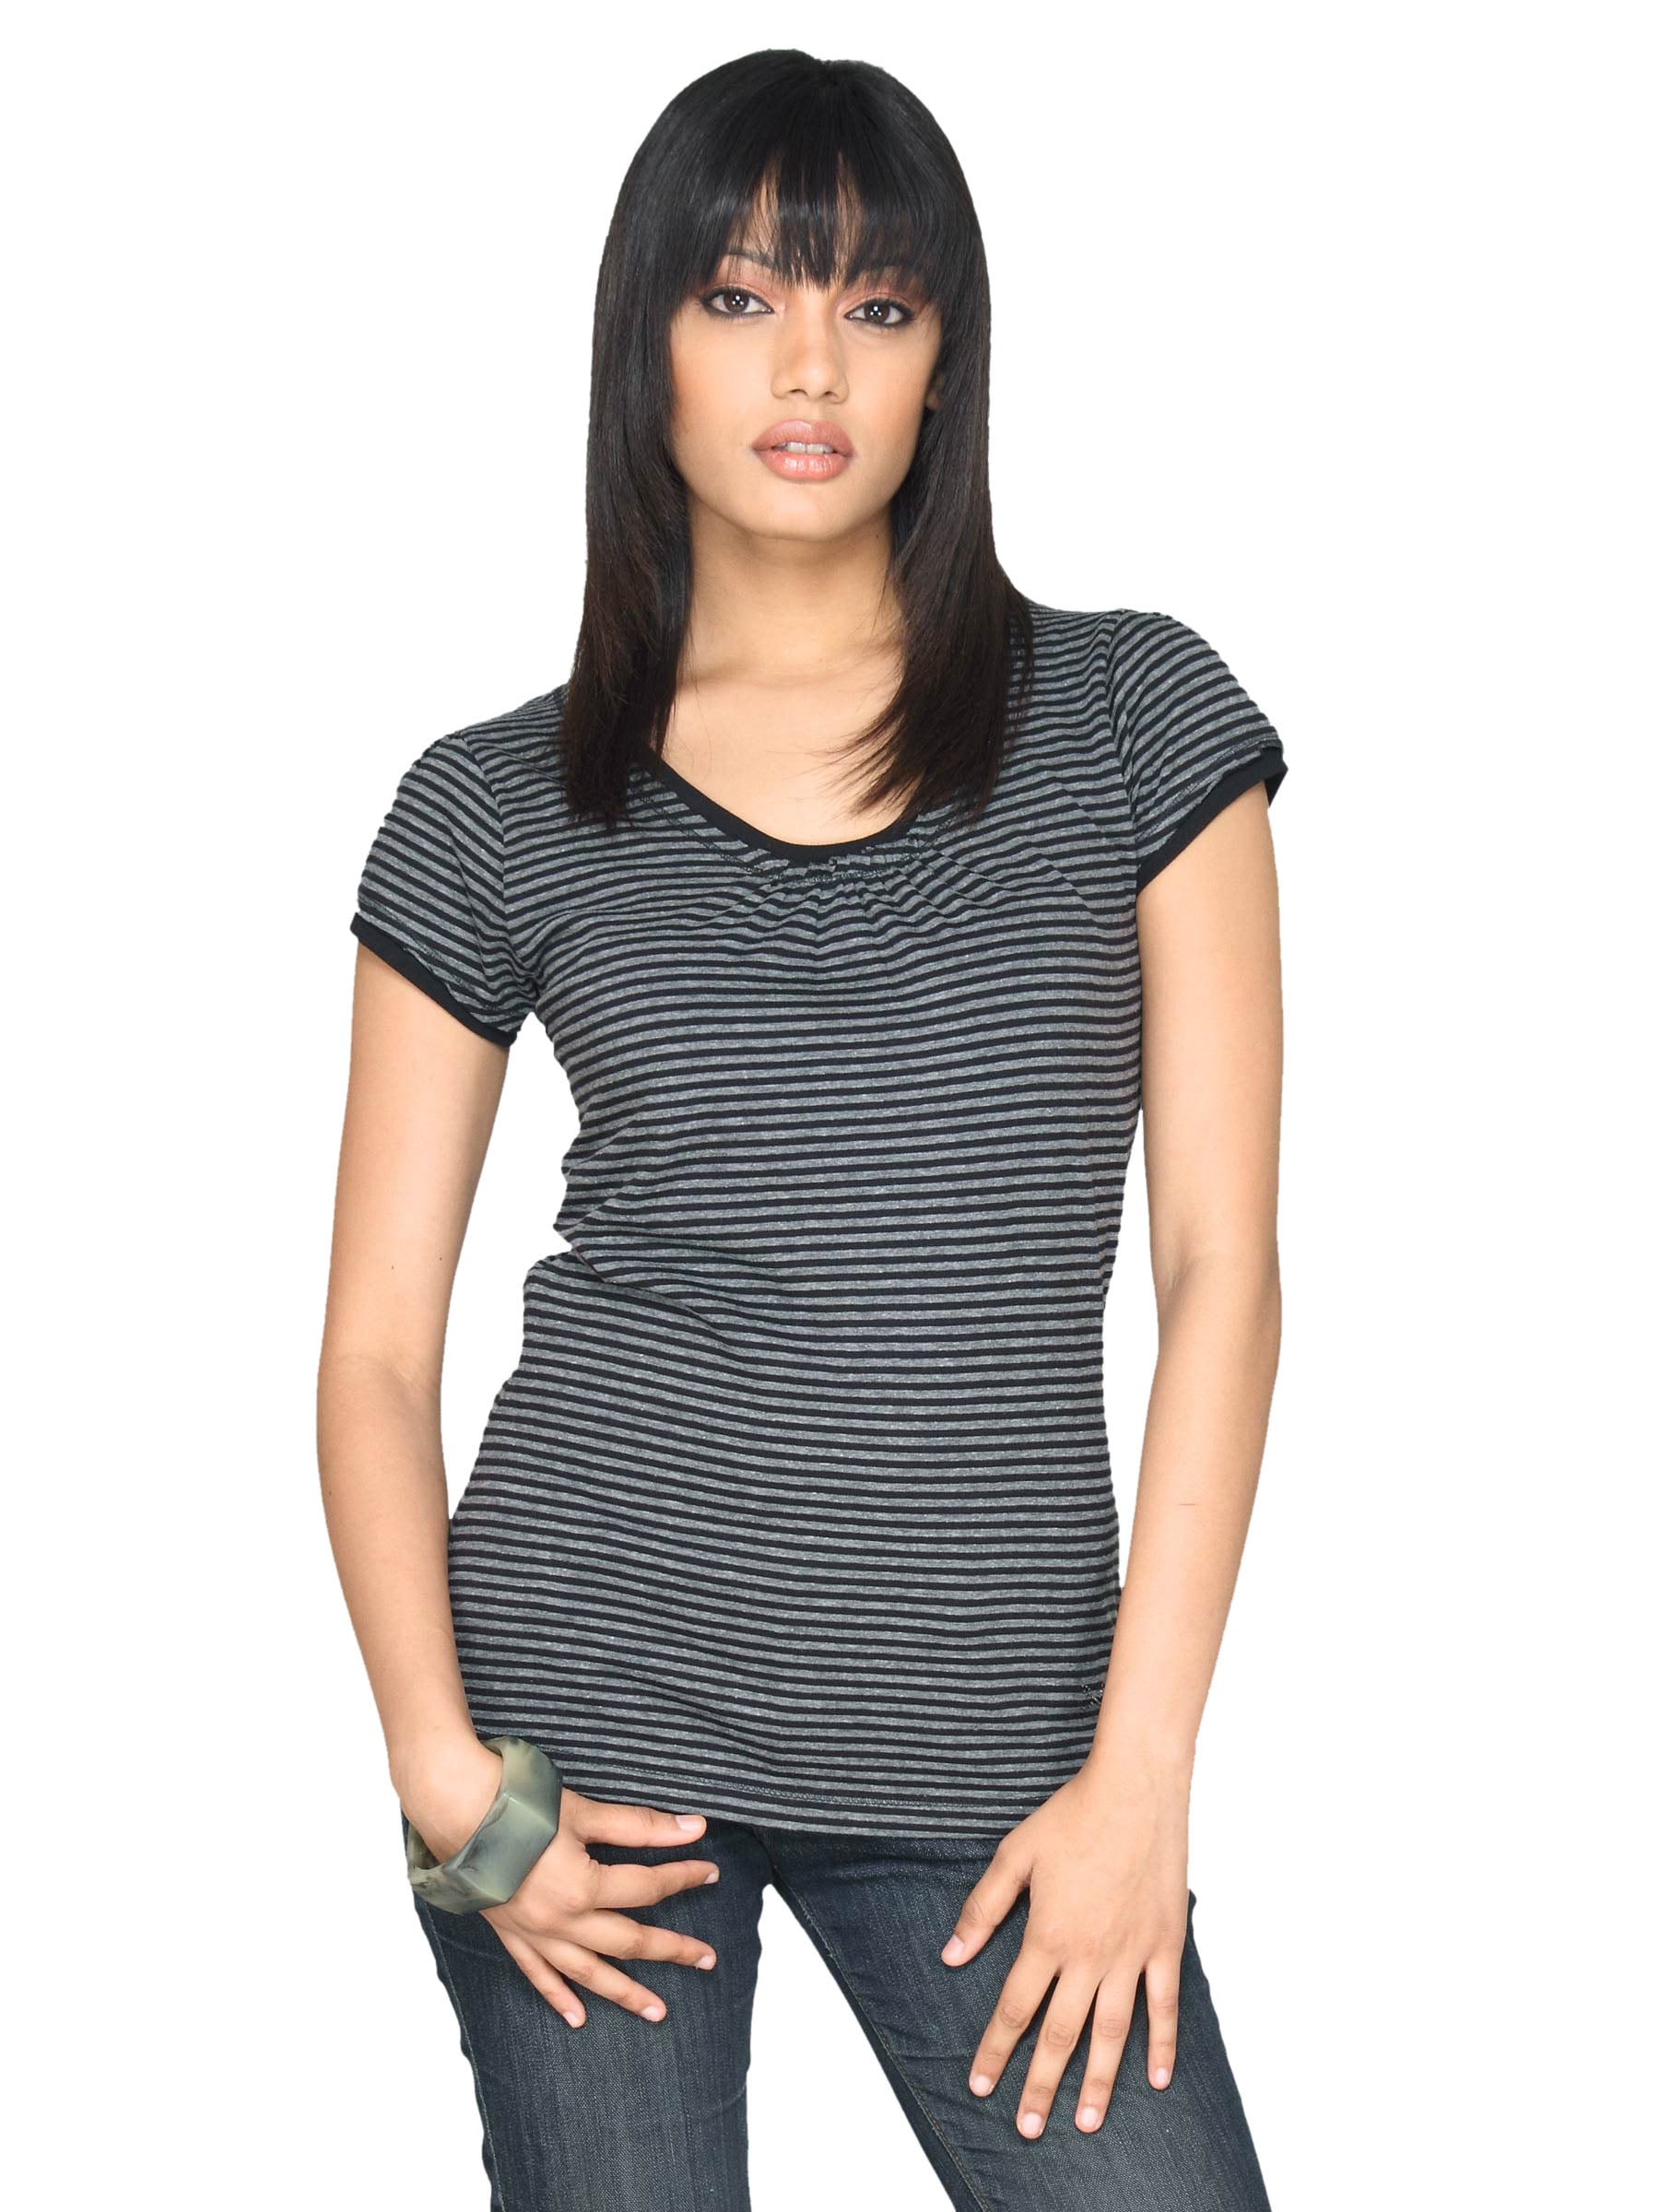 Scullers For Her Women's Wow Knit Grey Top